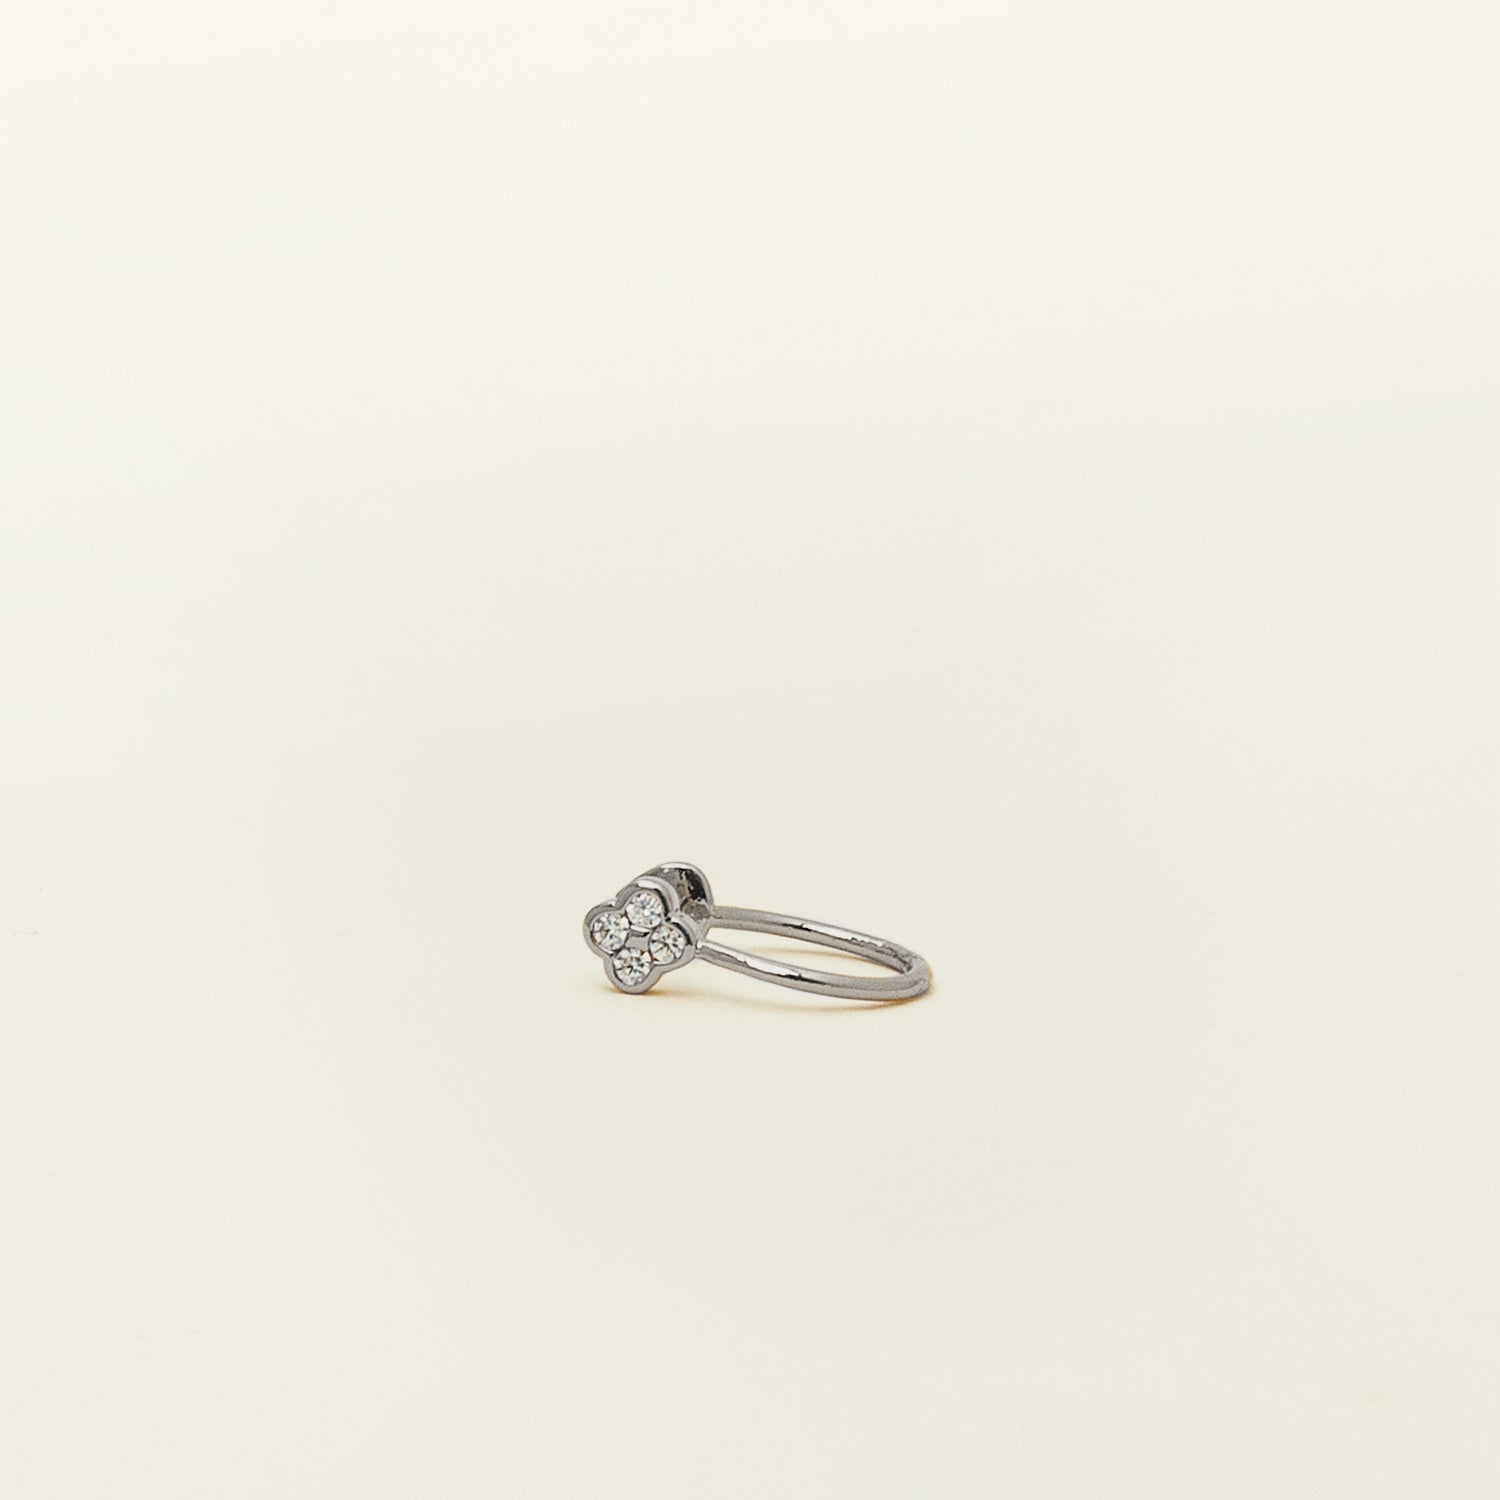 Image of the Silver Clover Ear Cuff, a chic and versatile accessory. Made from Gold or Silver Plated Copper alloy, this modern clover-shaped ear cuff features 4 sparkling Cubic Zirconia stones. Ideal for both the nose and ear, it effortlessly adds sophistication to any outfit, allowing you to adorn yourself with style and flair.